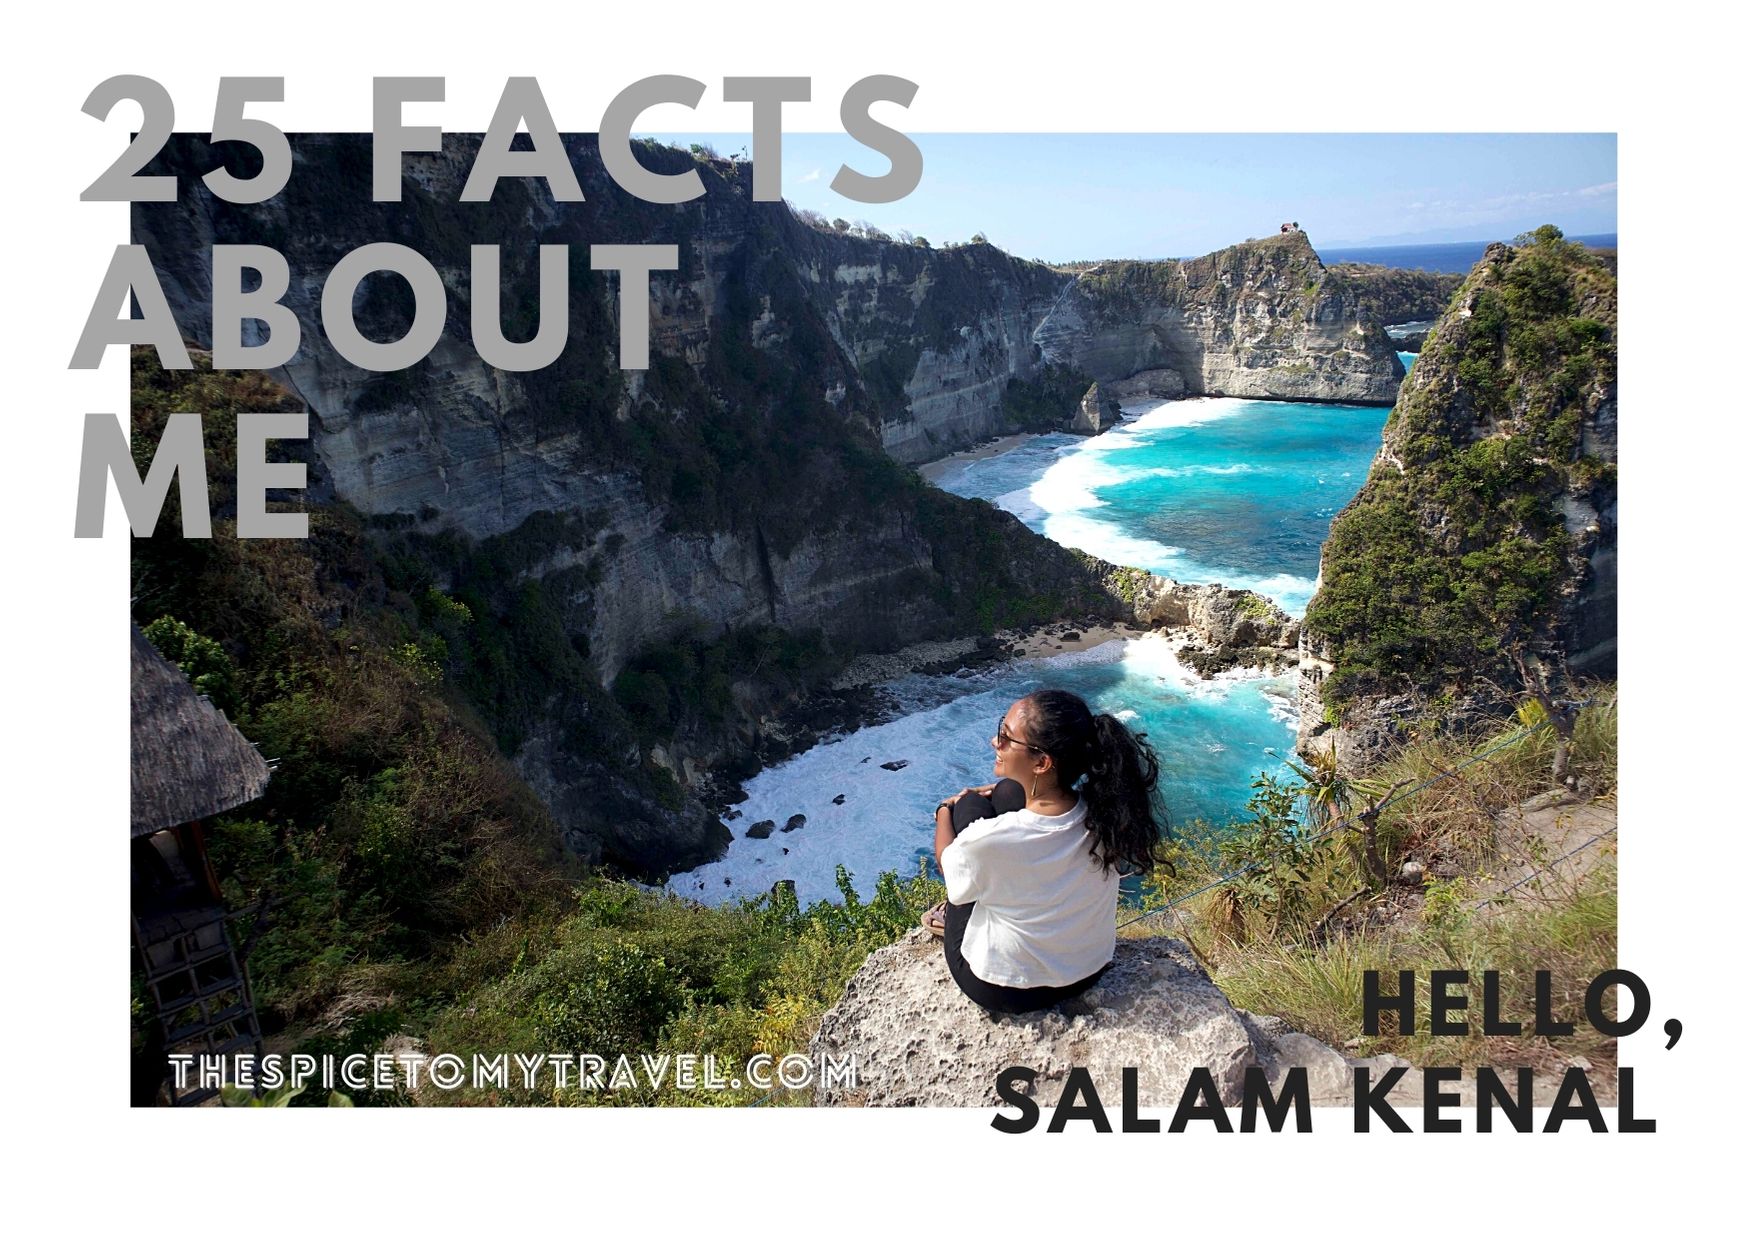 Salam Kenal “25 Facts About Me”